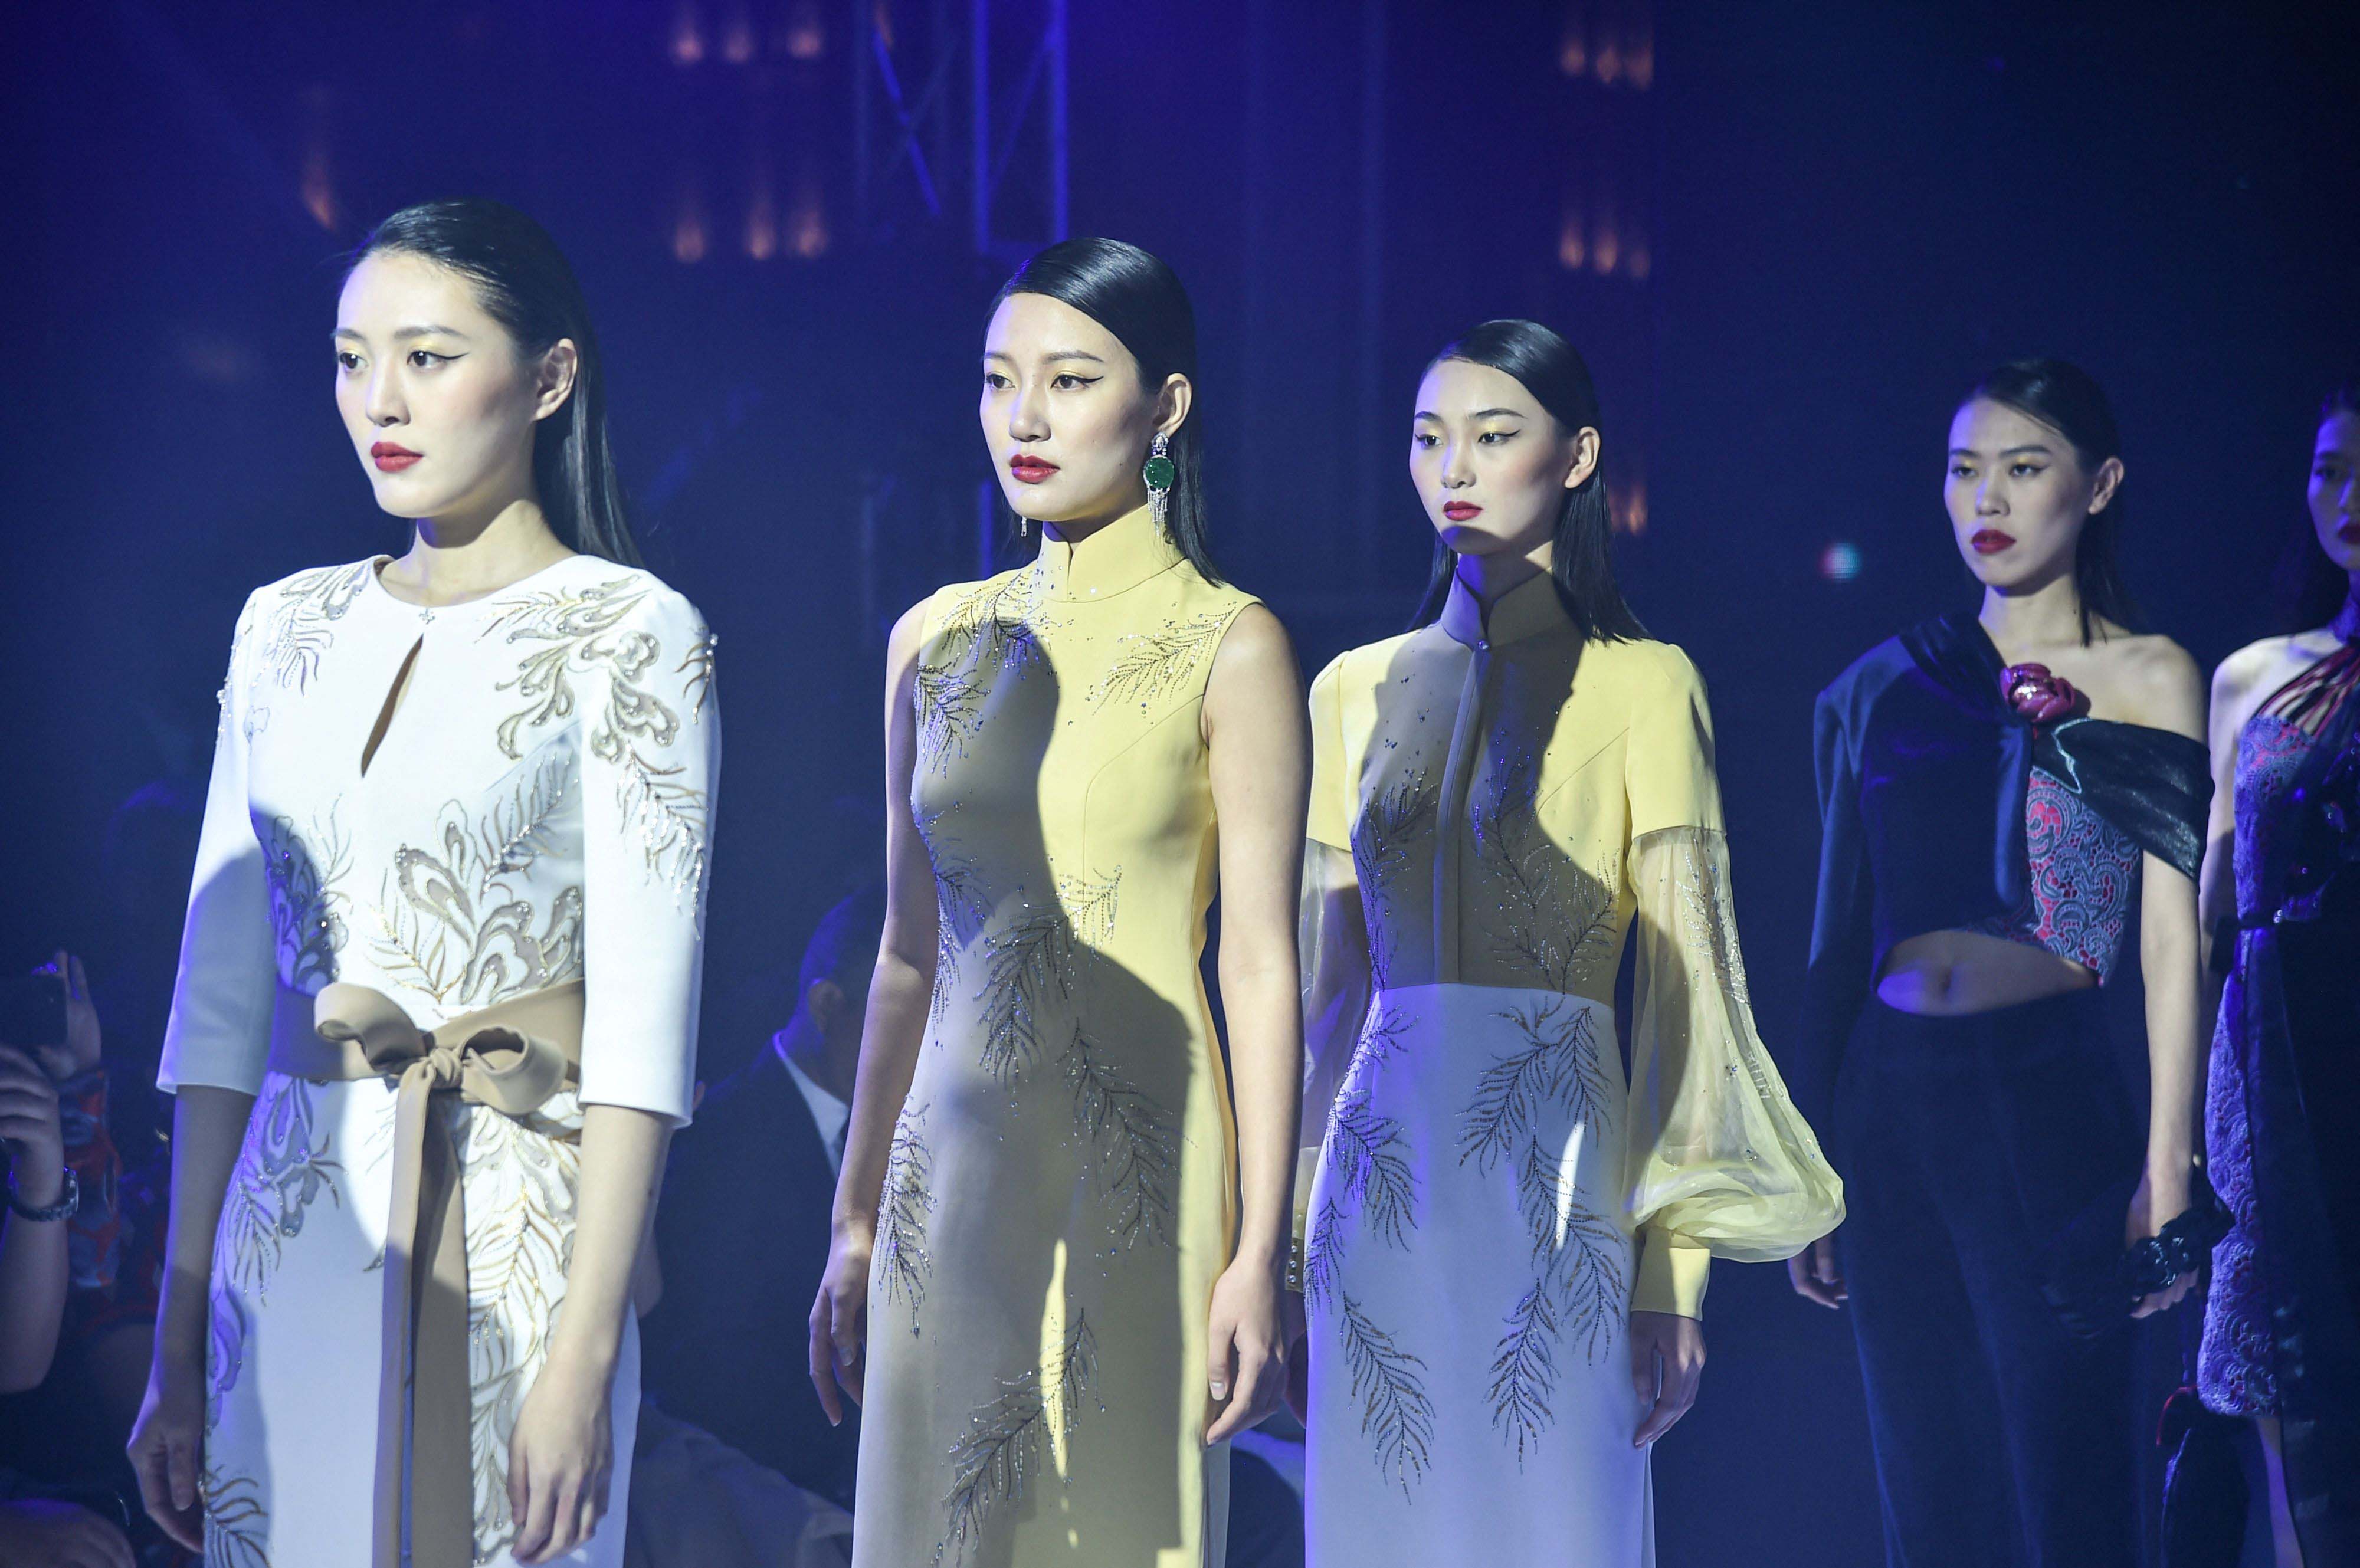 This photo shows models wearing traditional Chinese dress Qipao rehearsing for a Shanghai fashion show.—AFP photosn